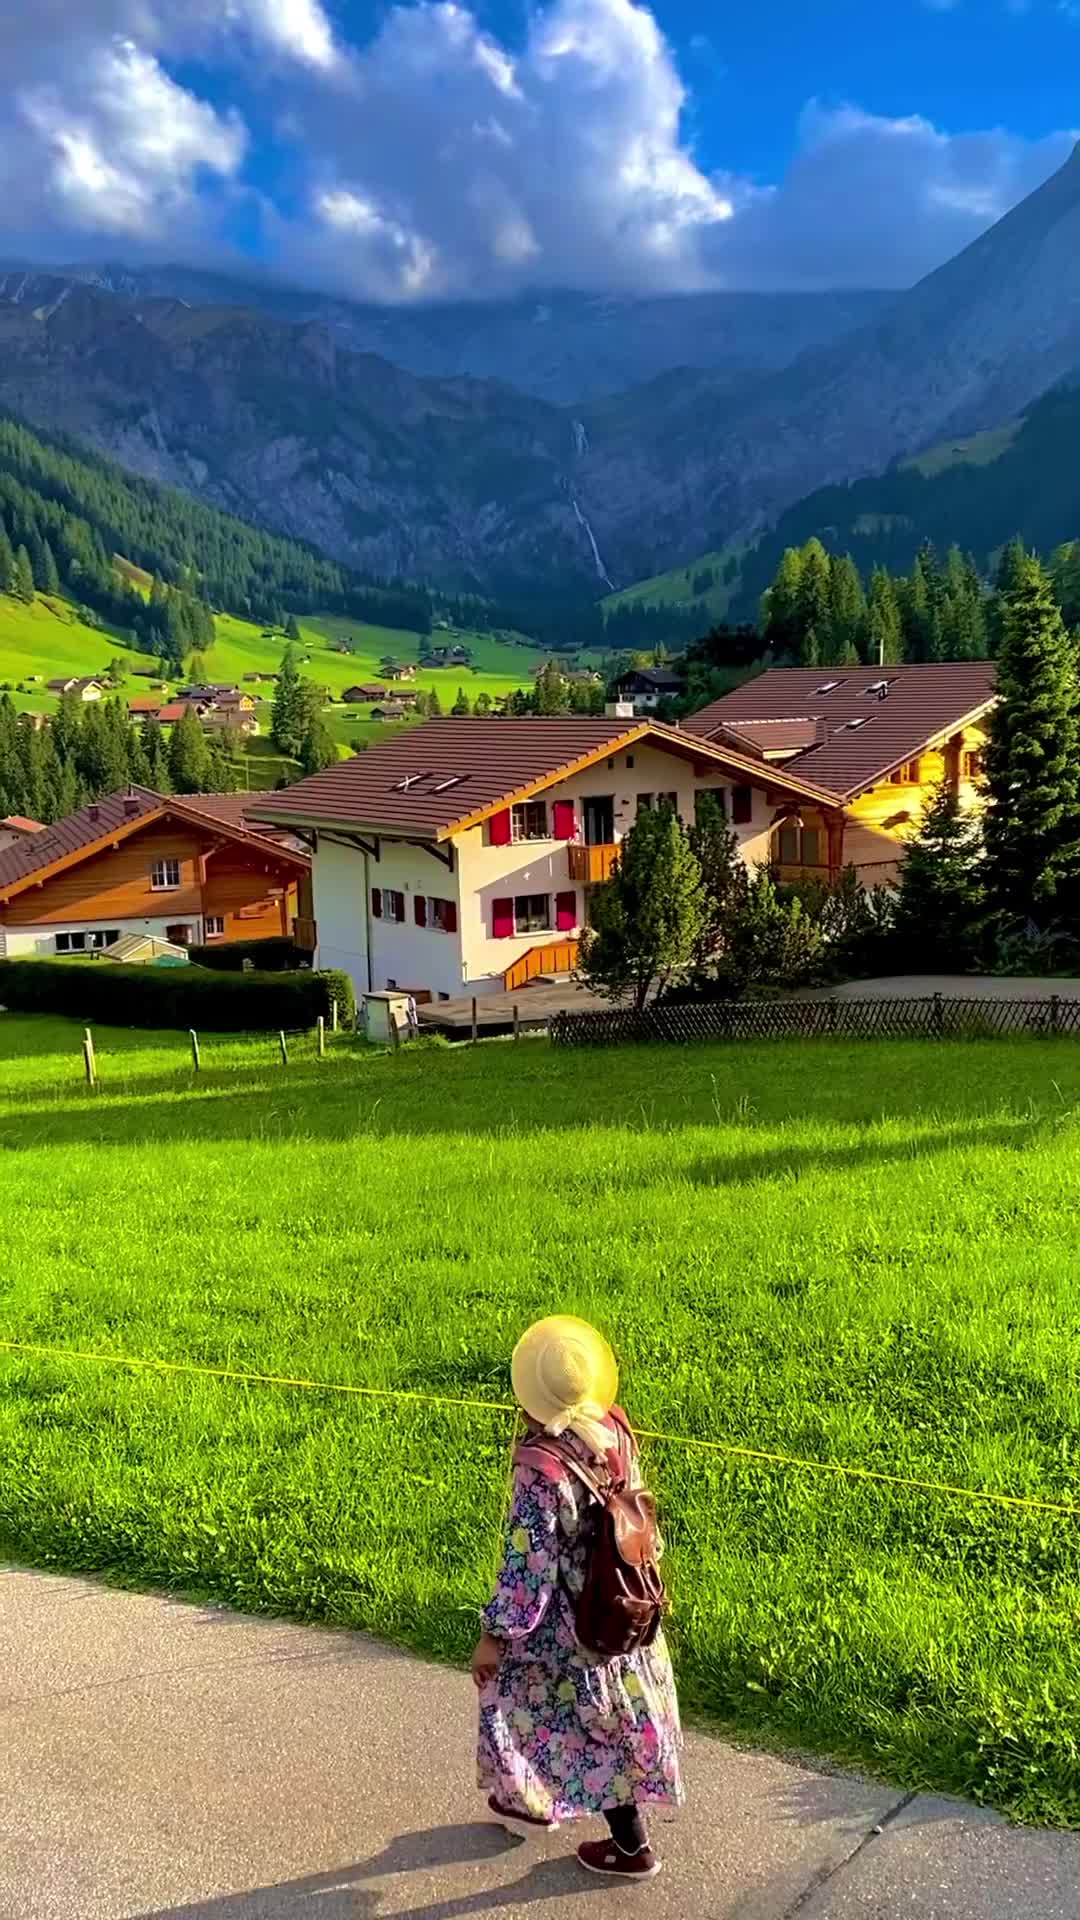 🇬🇧🇮🇩👇🇨🇭SPECTACULAR ALPEN VILLAGE IN BERNER OBERLAND, SWITZERLAND🇨🇭READ THIS👇

📍ADELBODEN, BERNER OBERLAND, SWITZERLAND🇨🇭

🍀How to get here: from Bern station take train to Frutigen station, from Frutigen take bus B230 to Adelboden 

🍀Transport train & bus covered/ free with swiss travel pass & saver day pass

❤️ SAVE this reel for YOUR NEXT SWISS TRIP🇨🇭✈️

❤️WATCH my IG story, IG Highlights, IG Guide for more

❤️ FOLLOW @syifa_in_switzerland DAILY🇨🇭DESTINATIONS & INFOS TO MAXIMIZE YOUR TRIP IN SWITZERLAND🇨🇭

#syifainswitzerland #swiss #schweiz #adelboden #berneroberland #adelbodentourismus #adelbodenlenkkandersteg #adelboden🇨🇭 #switzerland #switzerland🇨🇭 #myswitzerland #inlovewithswitzerland #visitswitzerland #switzerlandwonderland #switzerland_vacations #bnw_switzerland #amazingswitzerland #iloveswitzerland #exploreswitzerland #igersswitzerland #switzerland_bestpix #switzerland_destinations #beautifulswitzerland #baselswitzerland #travelswitzerland #loveswitzerland #switzerlandtrip #switzerlandtourism #bestofswitzerland